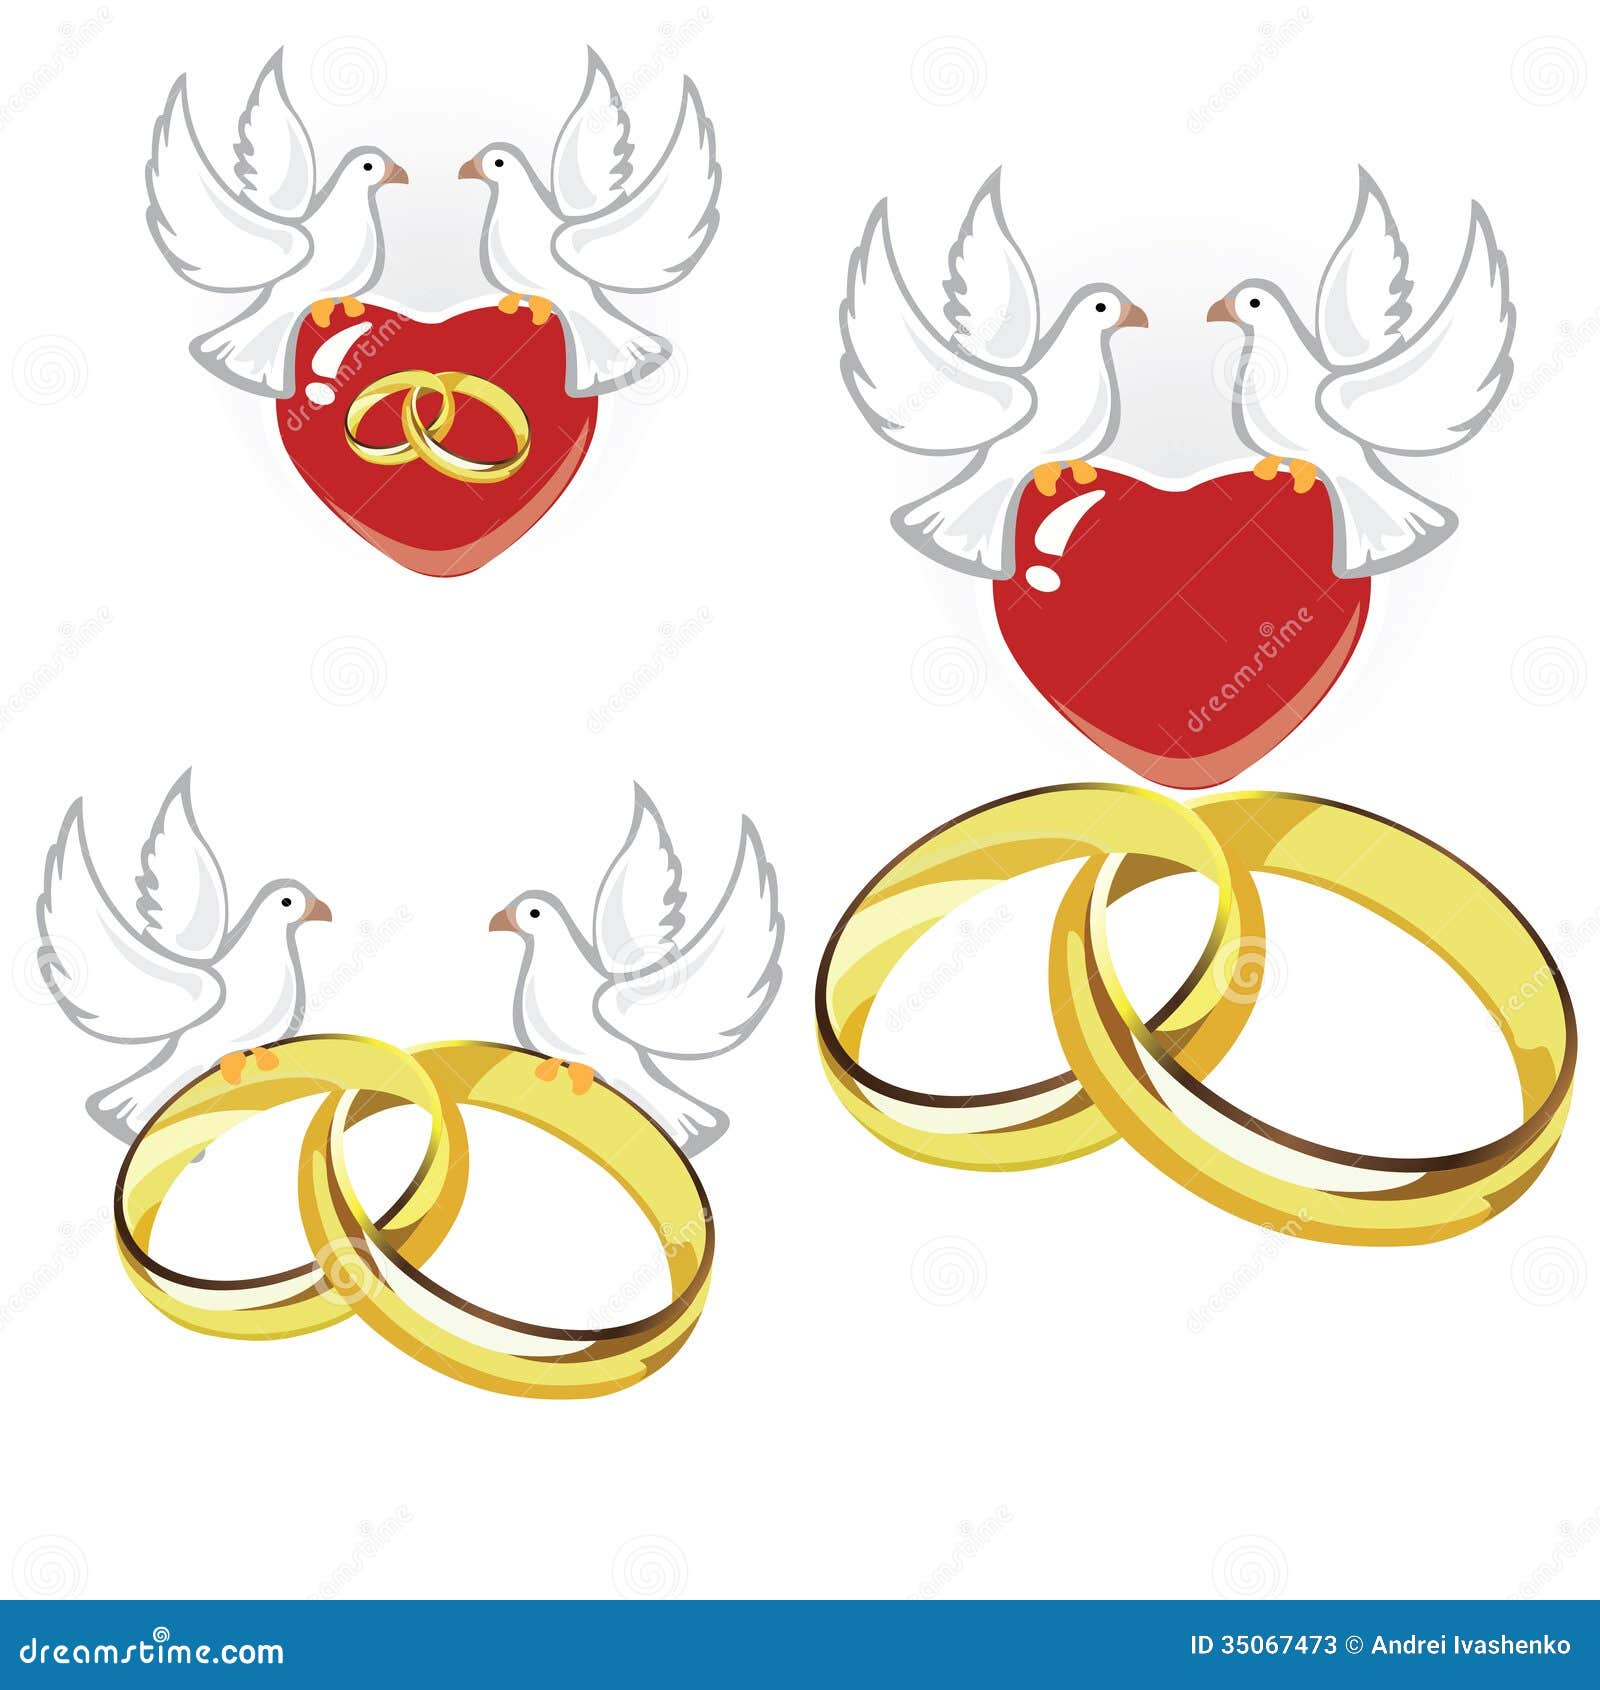 clipart wedding rings and doves - photo #31